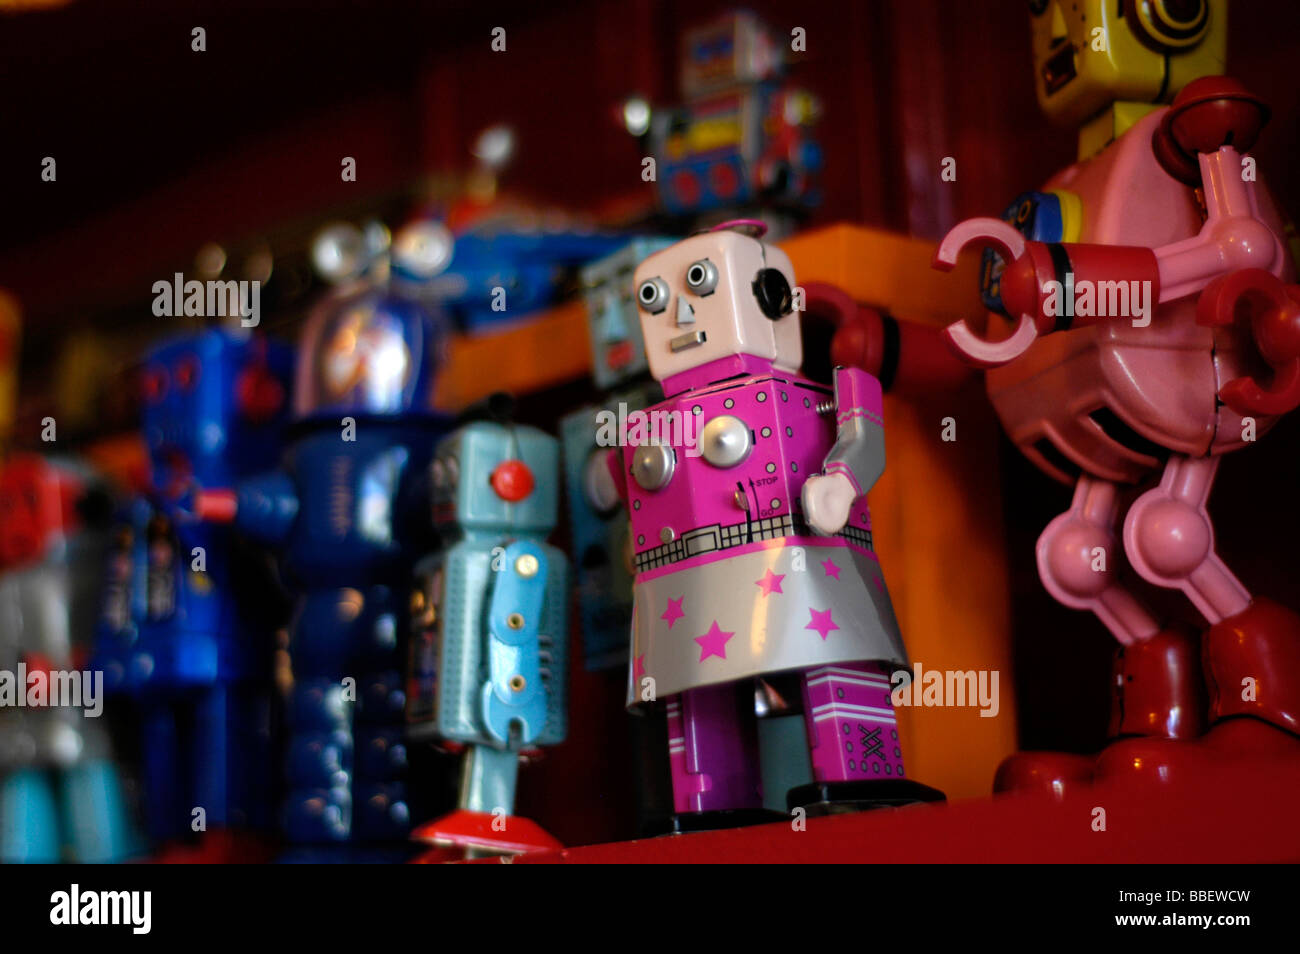 Close-up of Toy Robots on a Shelf Stock Photo